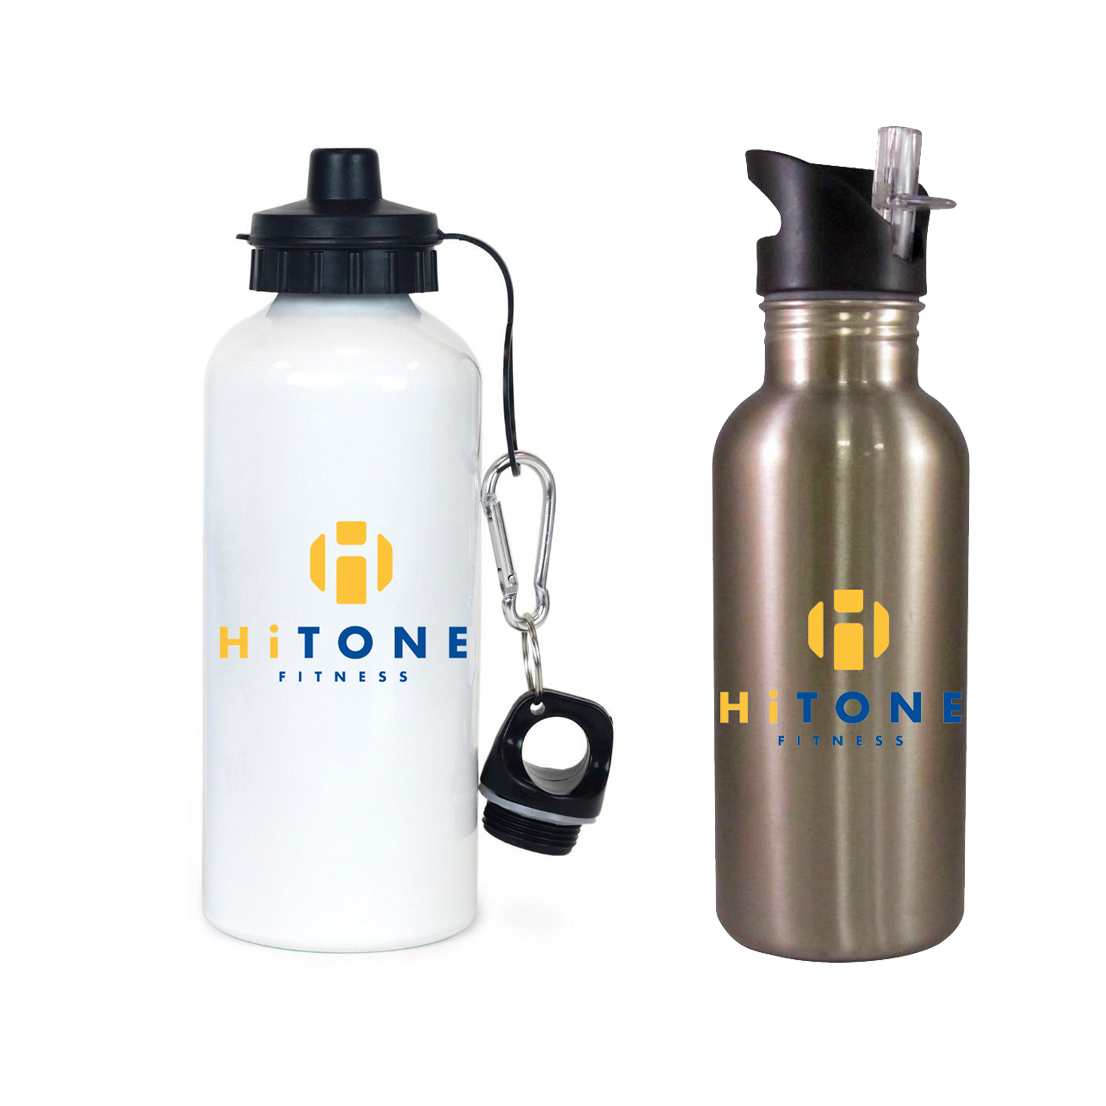 HiTONE Fitness Team Water Bottle